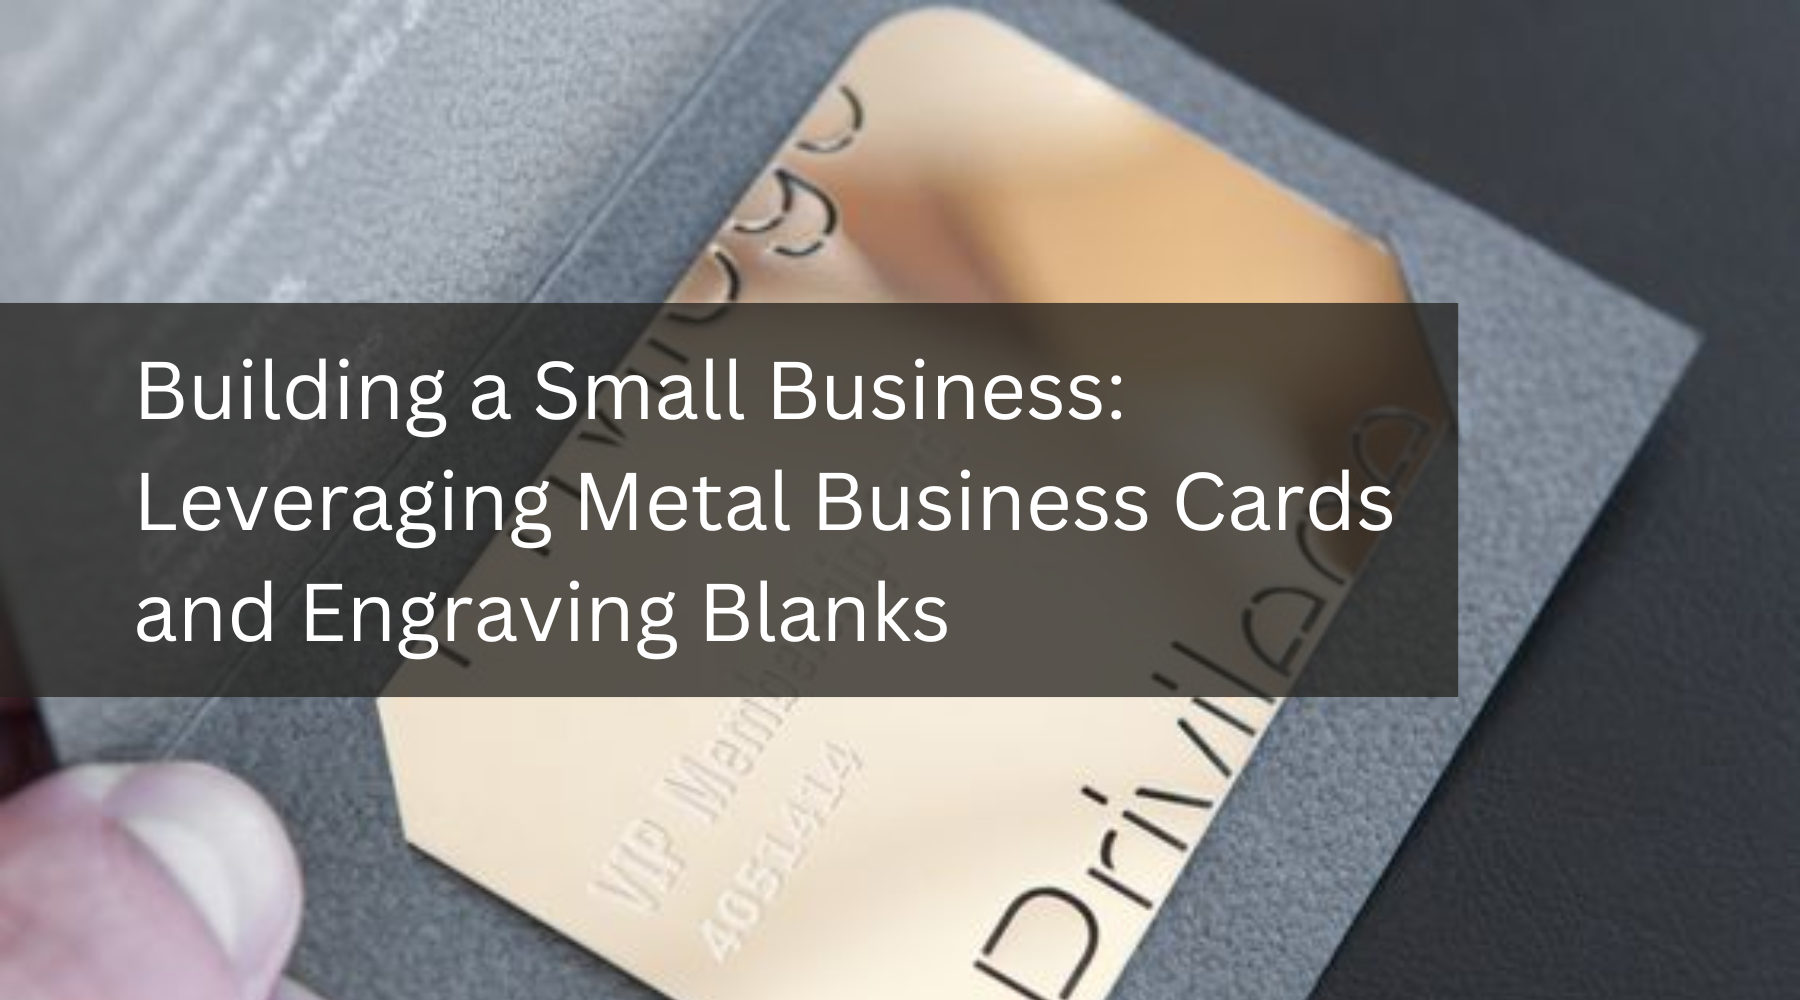 Building a Thriving Small Business: Leveraging Metal Business Cards and Engraving Blanks